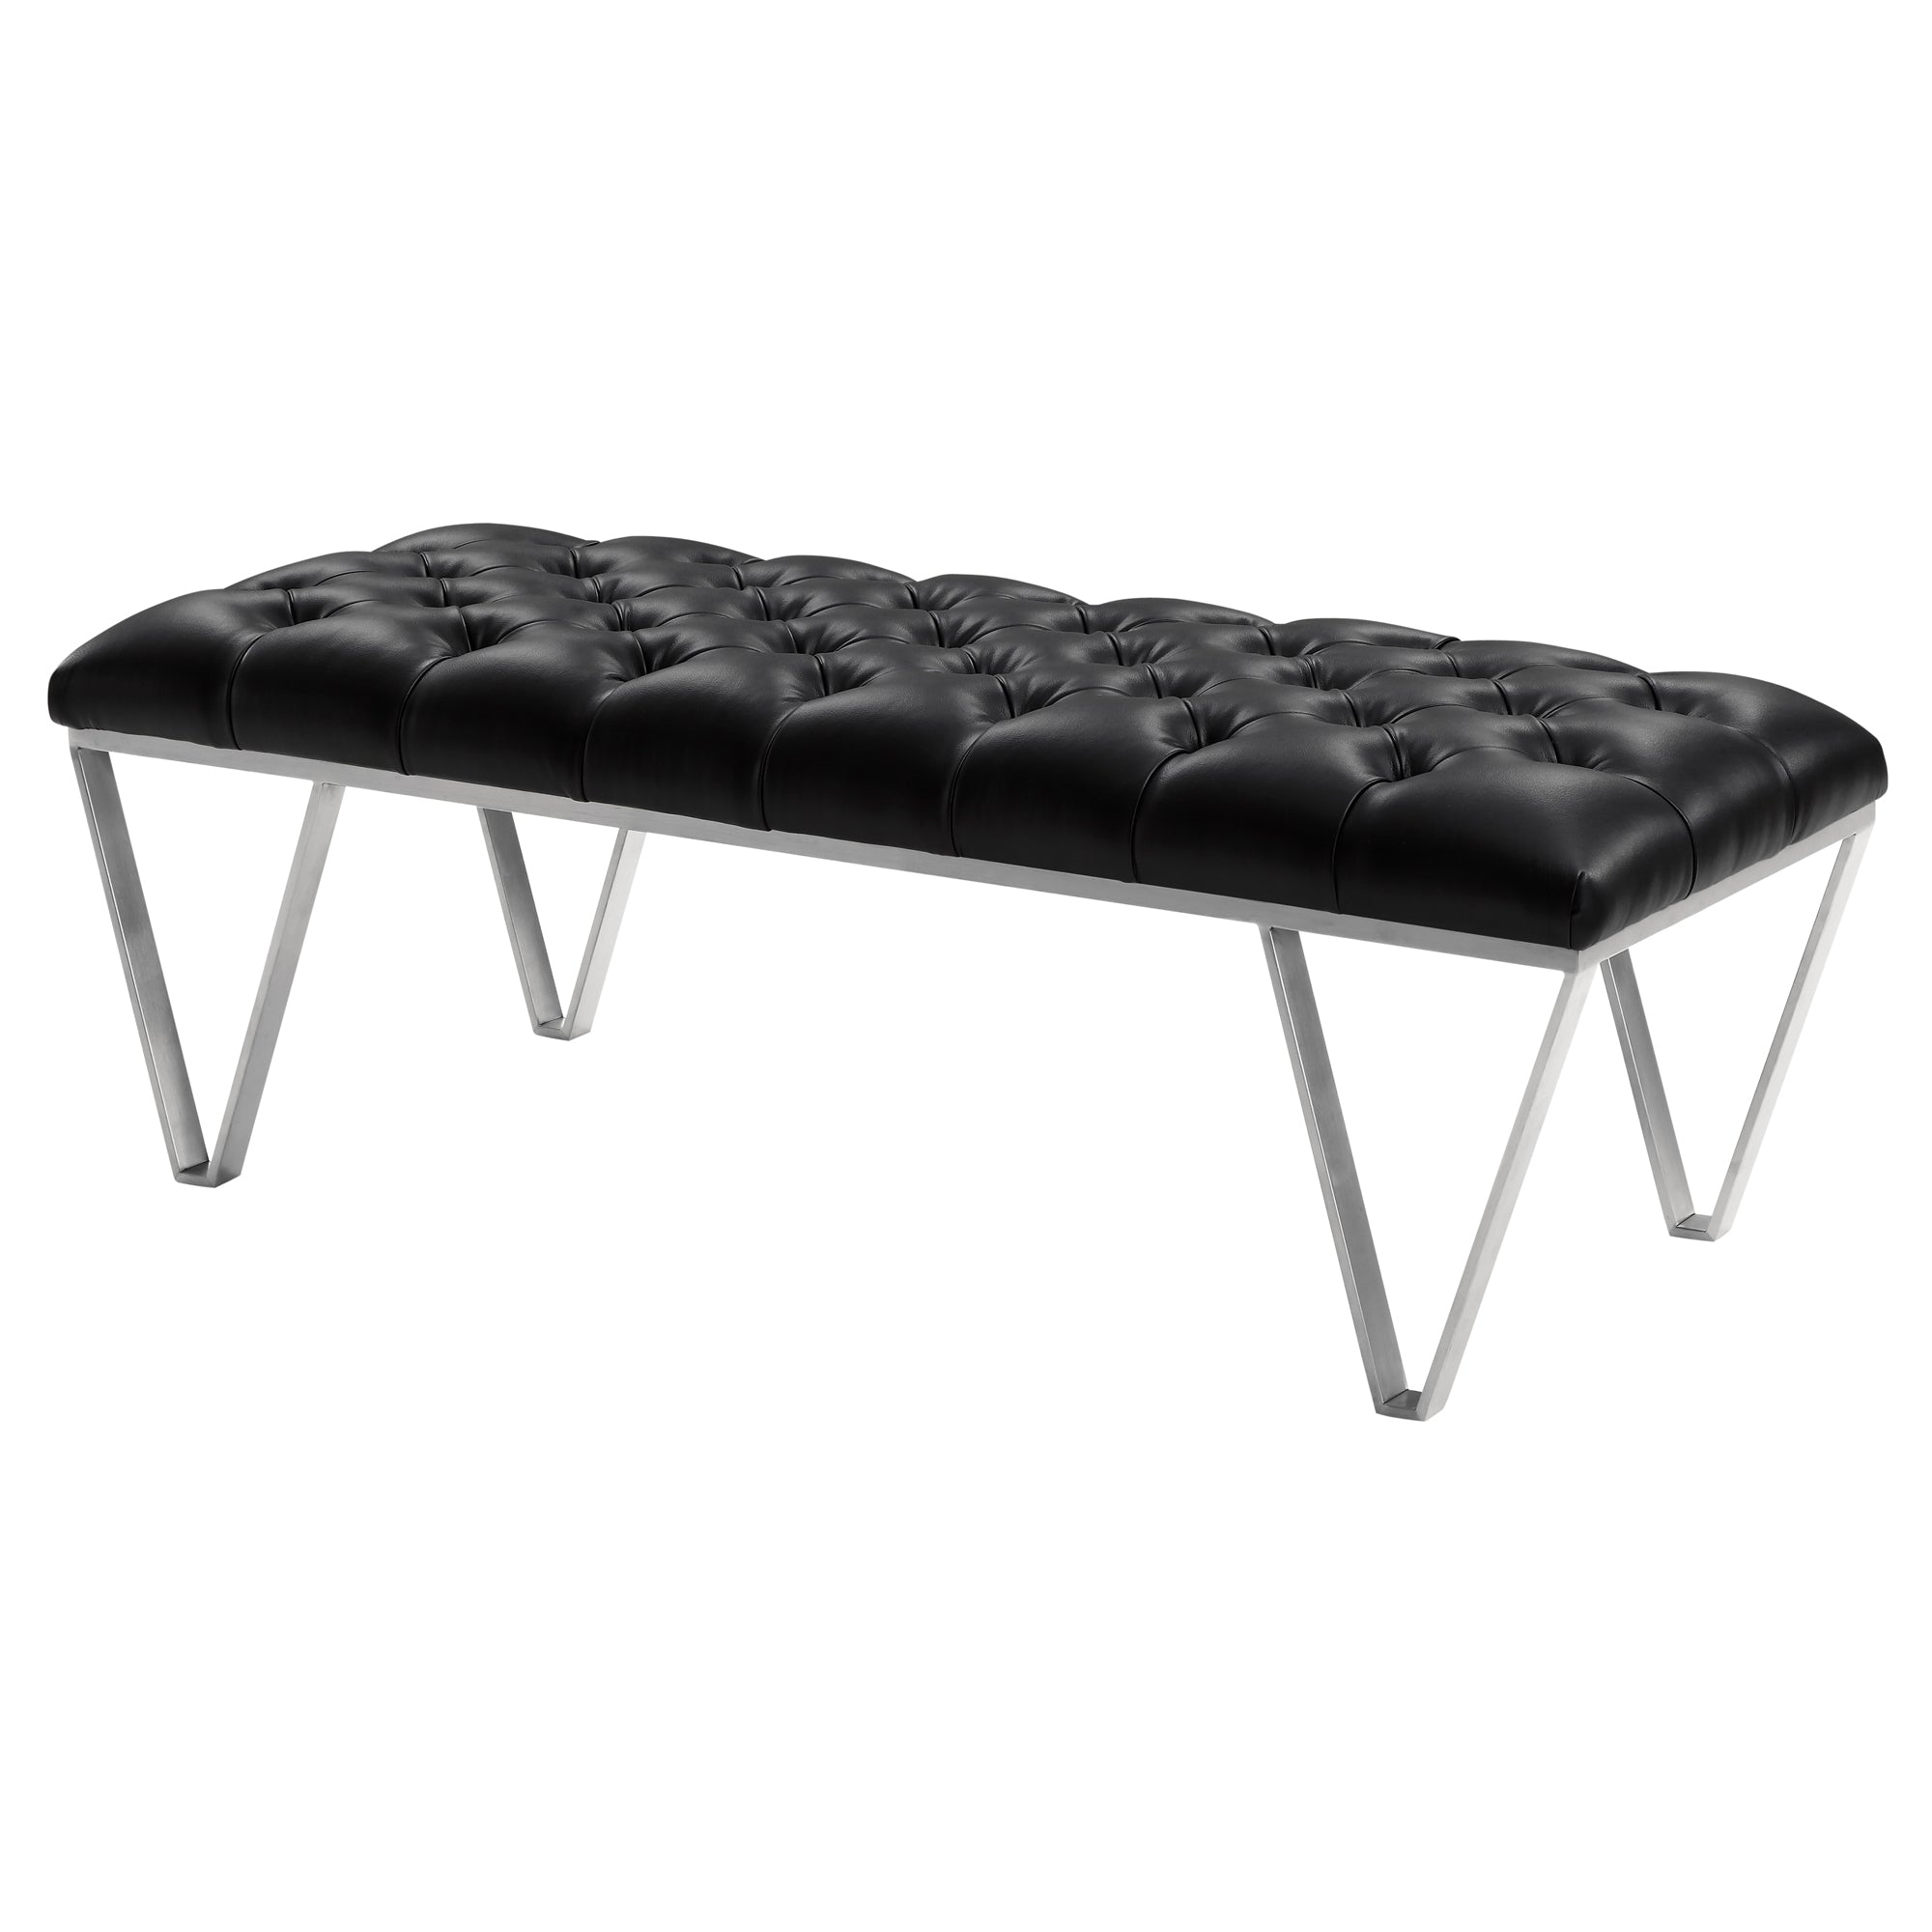 Armen Living Lcsrbeblack Serene Contemporary Tufted Bench In Brushed Stainless Steel With Black Faux Leather